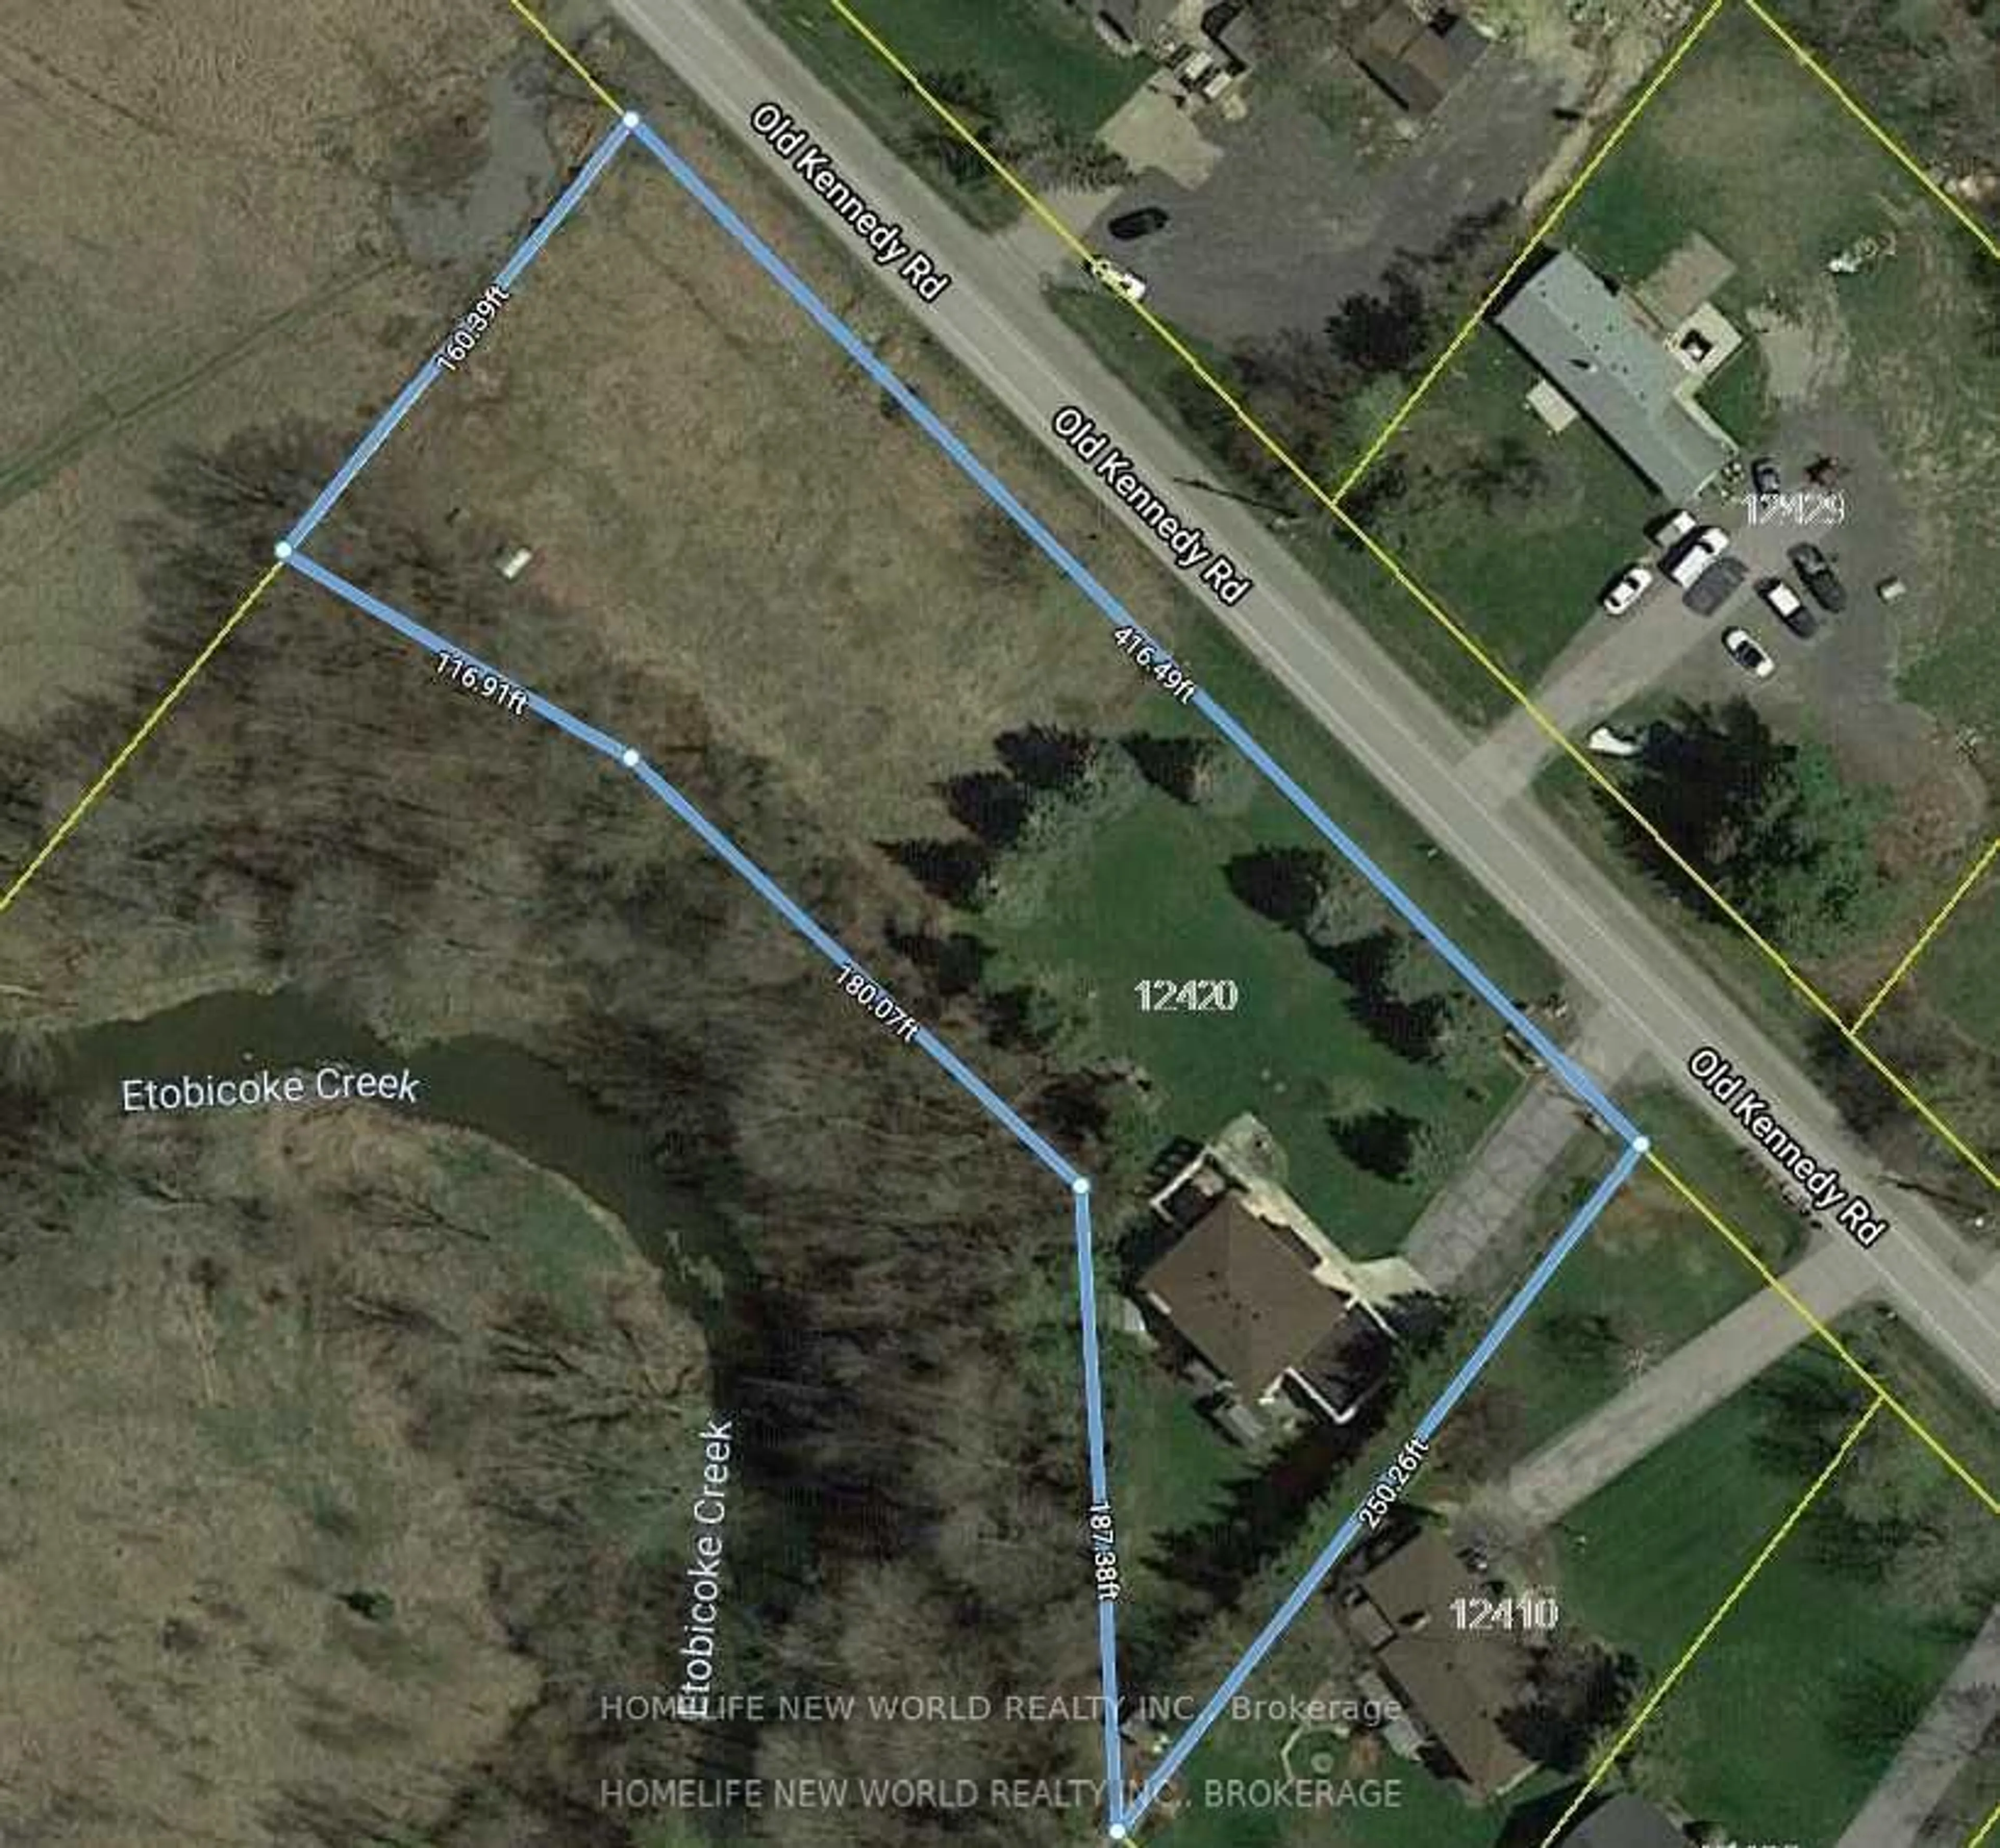 Picture of a map for 12420 Old Kennedy Rd, Caledon Ontario L7C 2E8